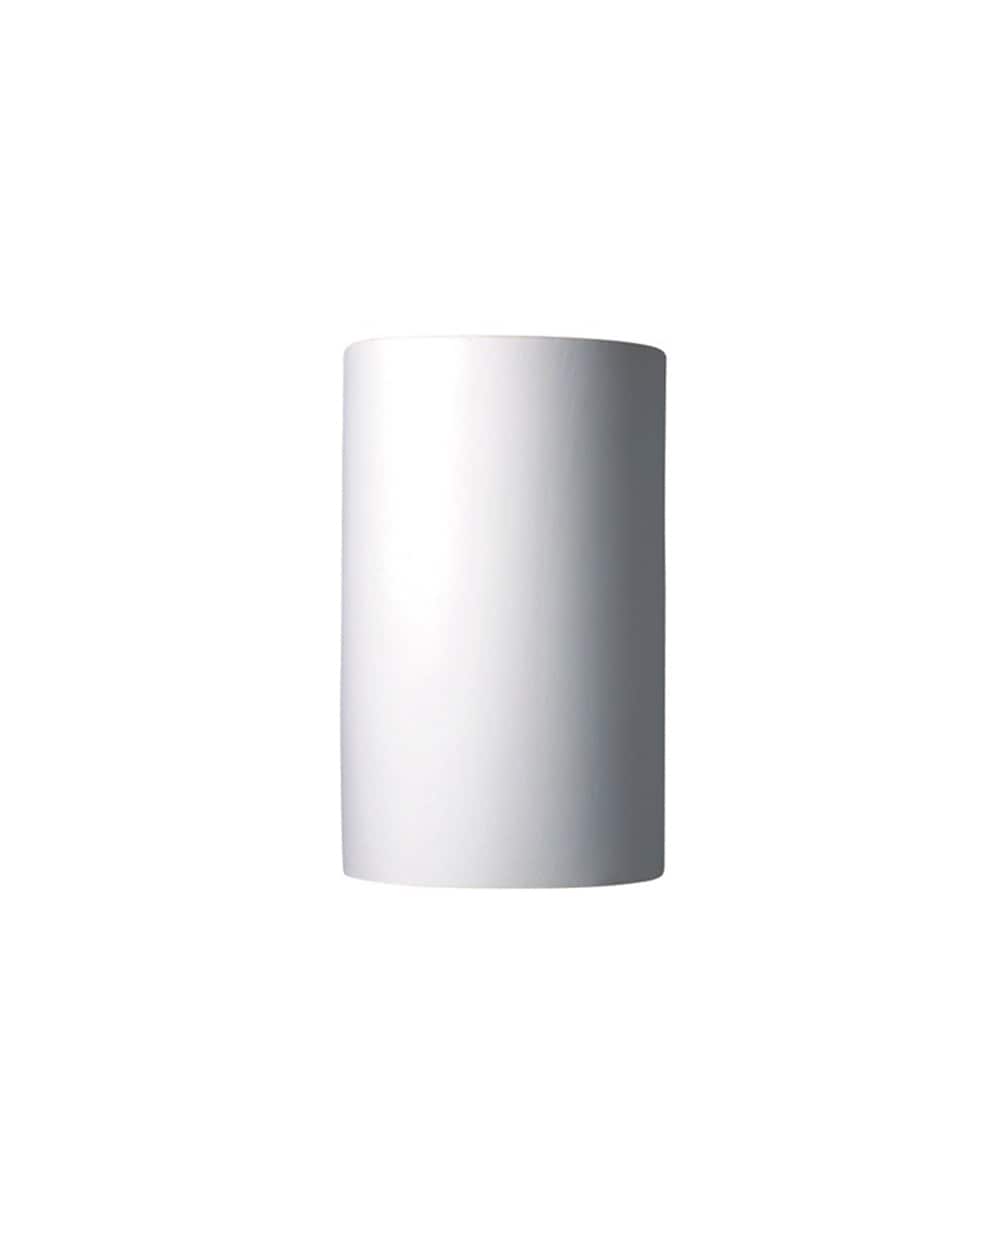 White Finished Justice Design Group CER-1390-BIS Lighting Wall Sconce with Ceramic Bisque Shades